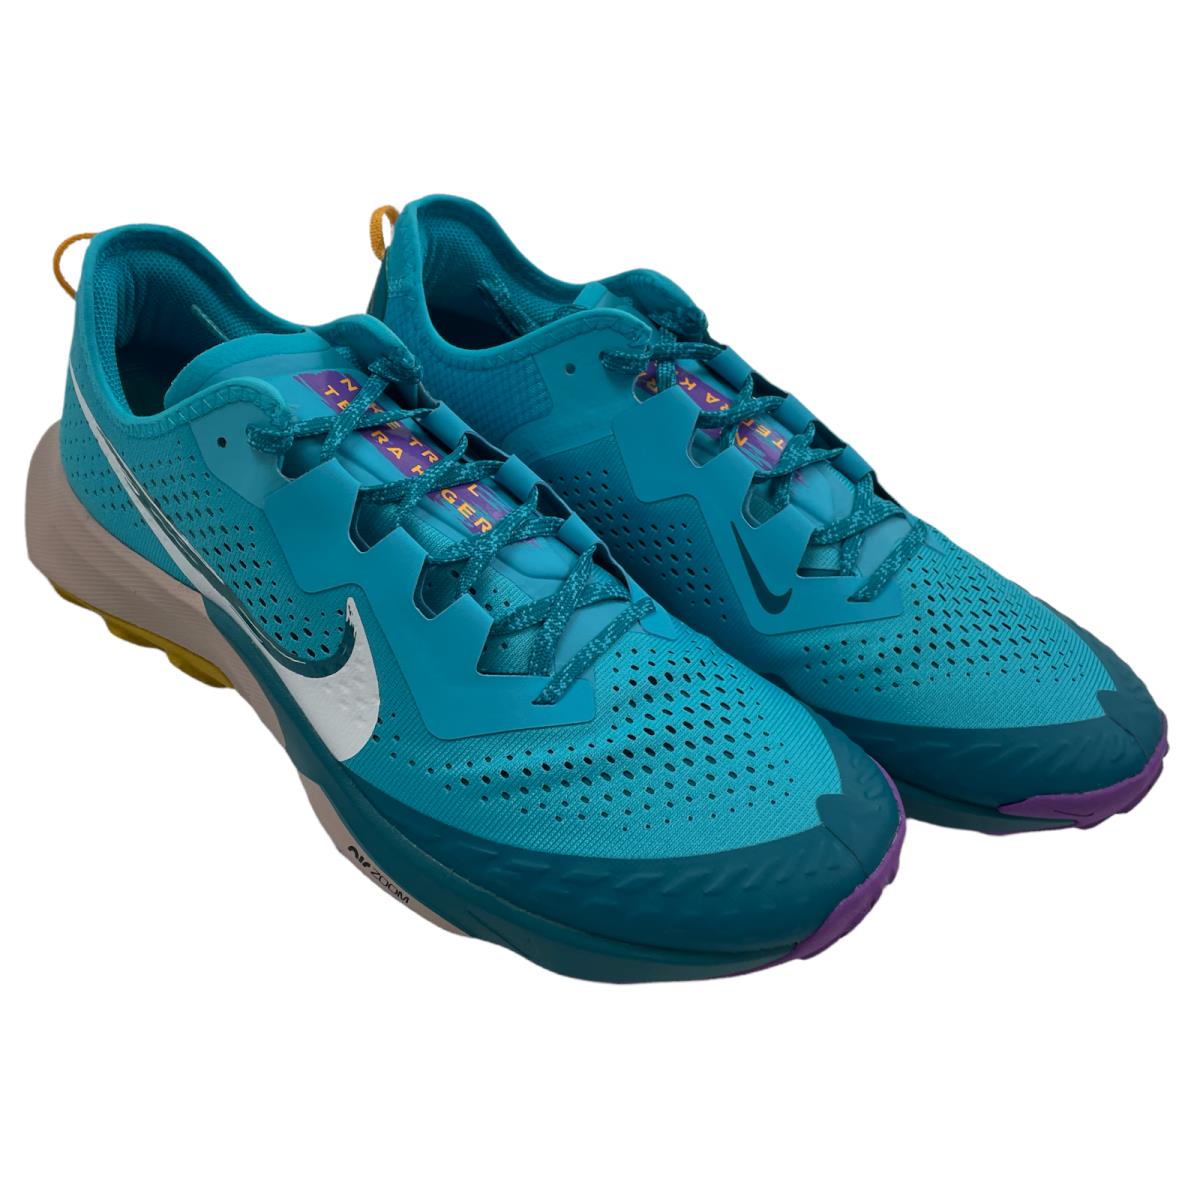 Nike Men`s Air Zoom Terra Kiger 7 Shoes CW6062 400 Turquoise Blue Size 12